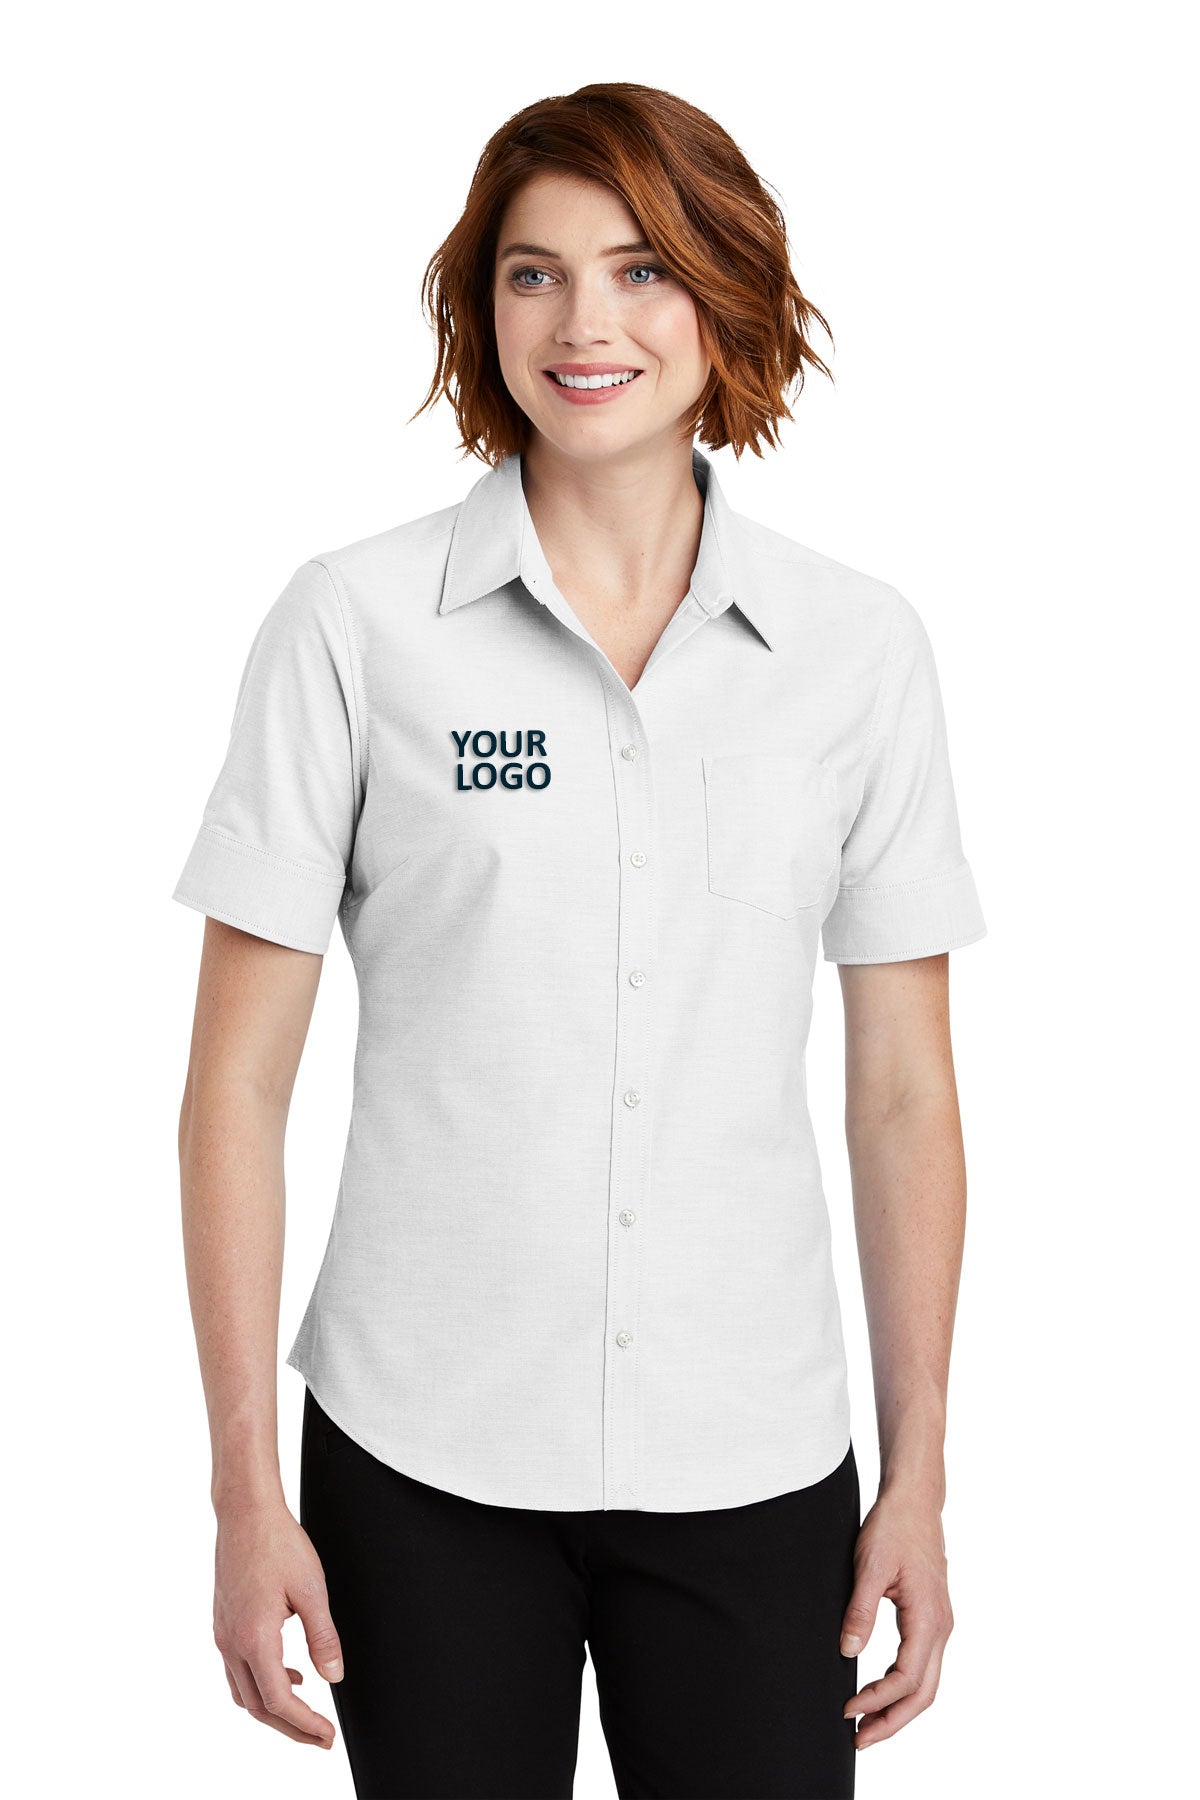 Port Authority White L659 work shirts with logo